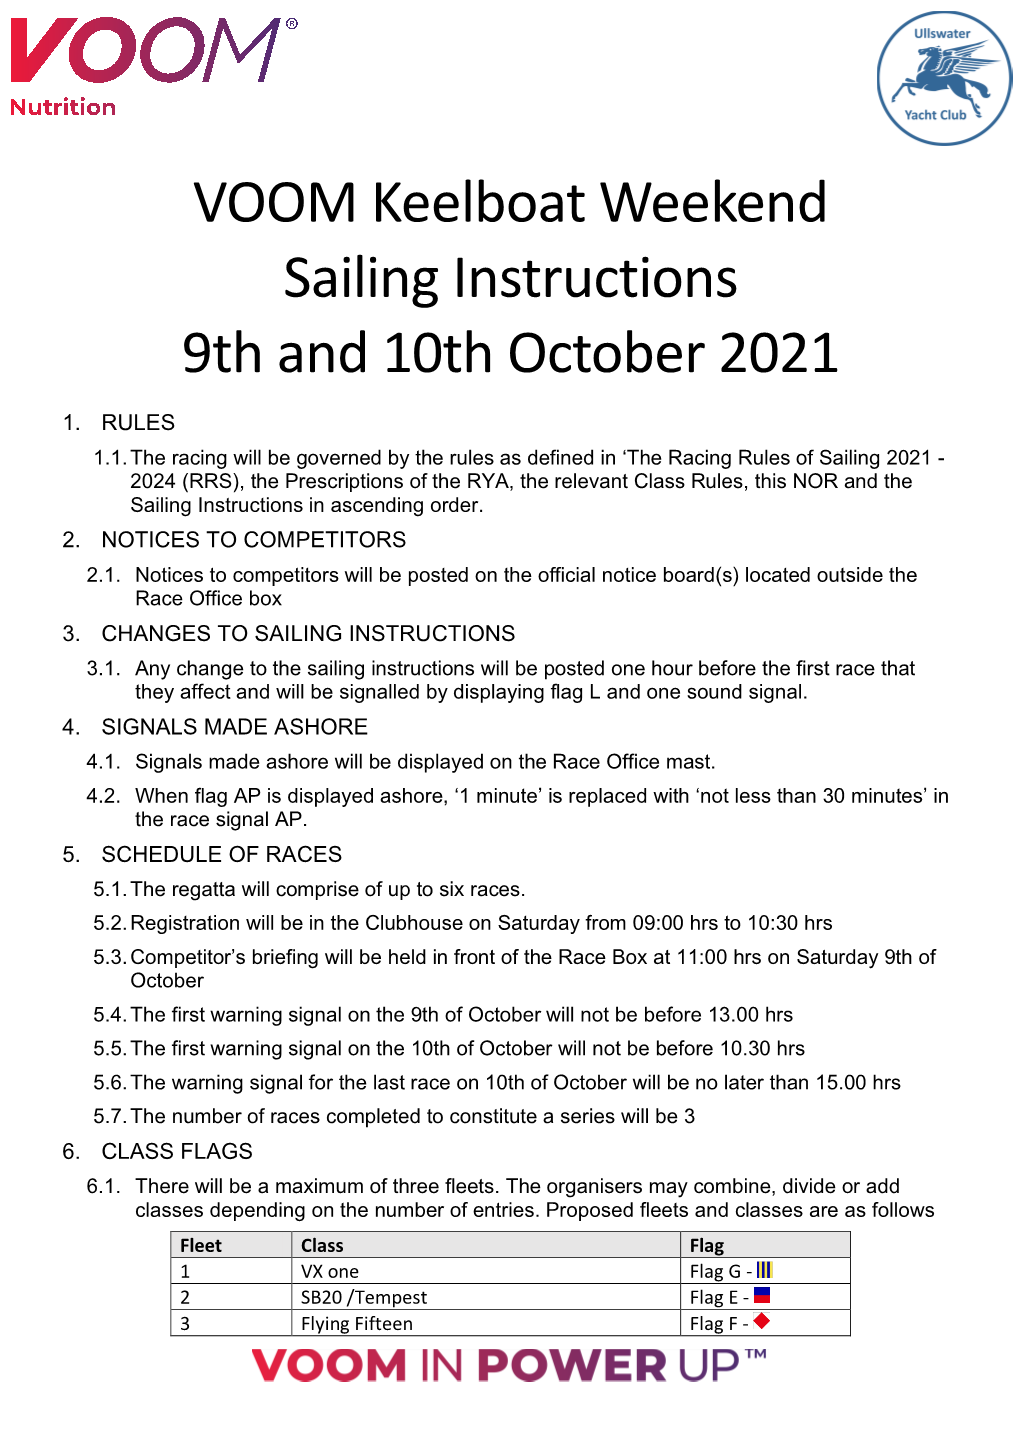 VOOM Keelboat Weekend Sailing Instructions 9Th and 10Th October 2021